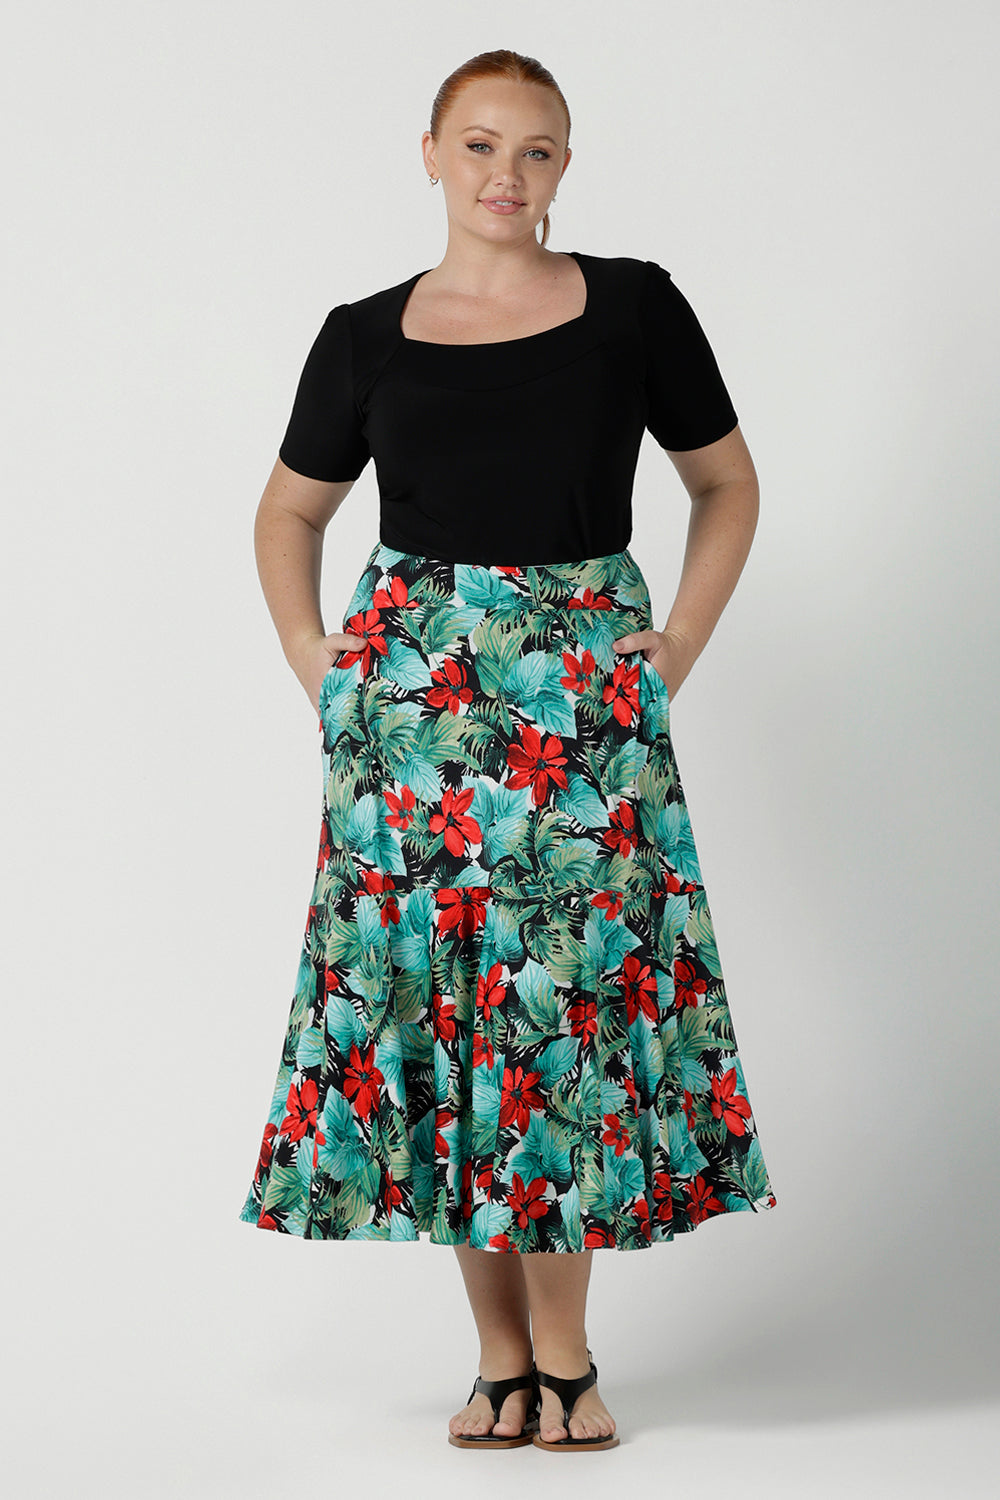 Size 12 woman wears Maxi Skirt in Havana print. Styled back with a black Berni Top. The Berit Maxi skirt features a tier, a waistband and side pockets. Perfect for a weekend away or holiday capsule wardrobe. Made in Australia for women size 8 - 24.